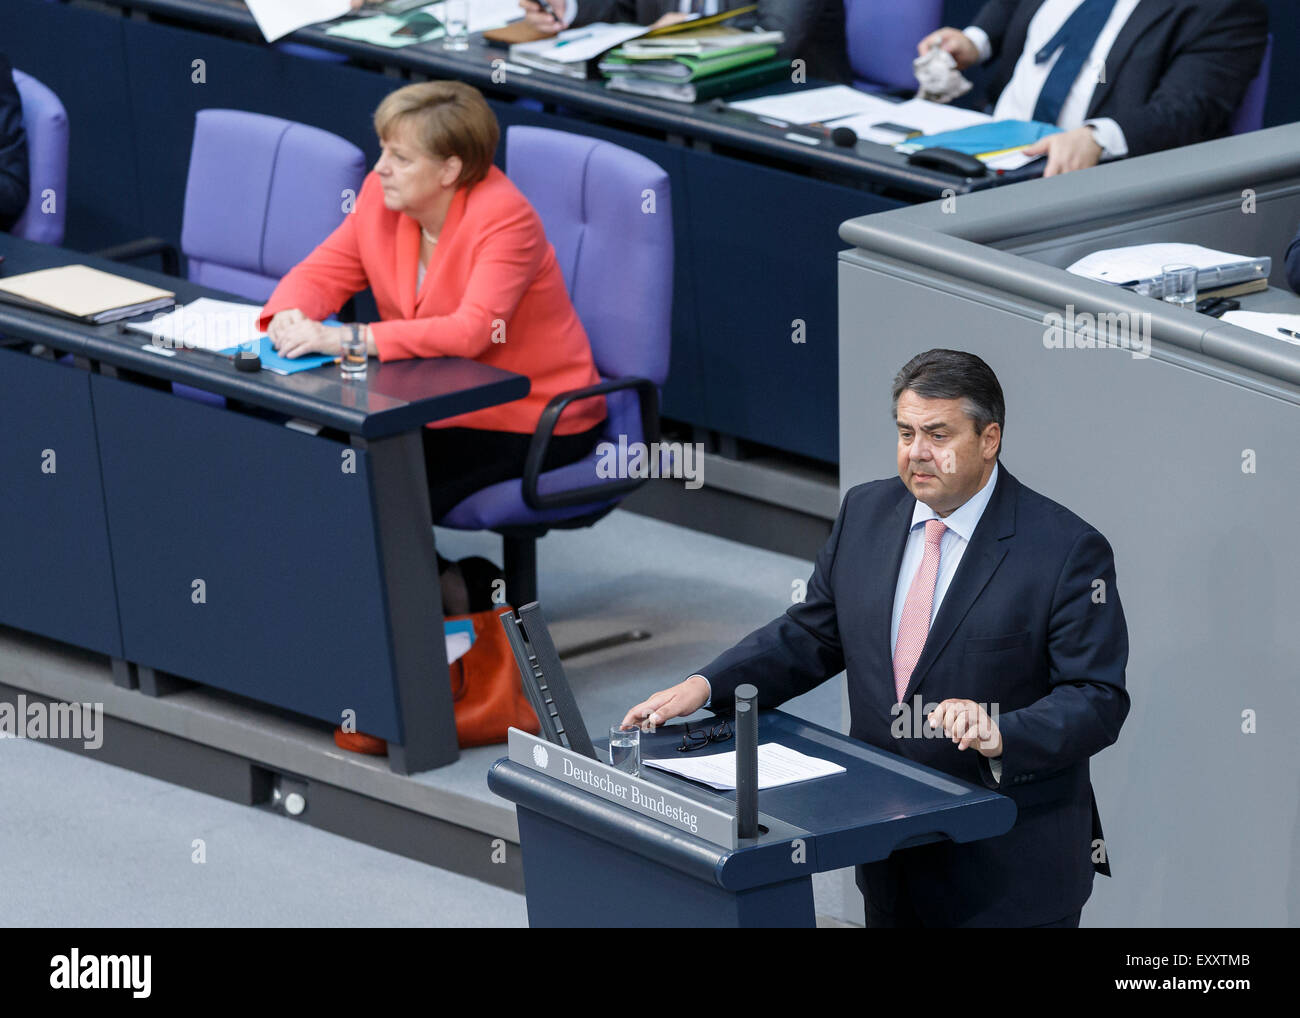 Berlin, Germany. 17th July, 2015. Special session of the German Parliament - consultation of government on the ' negotiations of the Government Federal relative to the concession of financial support for the Hellenic Republic of Greece ' realized at the German Parliament on 17.07.2015 in Berlin, Germany. / Picture: Sigmar Gabriel (SPD), German Minister of Economy and Energy, during his speech at the session of the german Parliament relative to the concession of financial support for the Hellenic Republic of Greece. Credit:  Reynaldo Chaib Paganelli/Alamy Live News Stock Photo